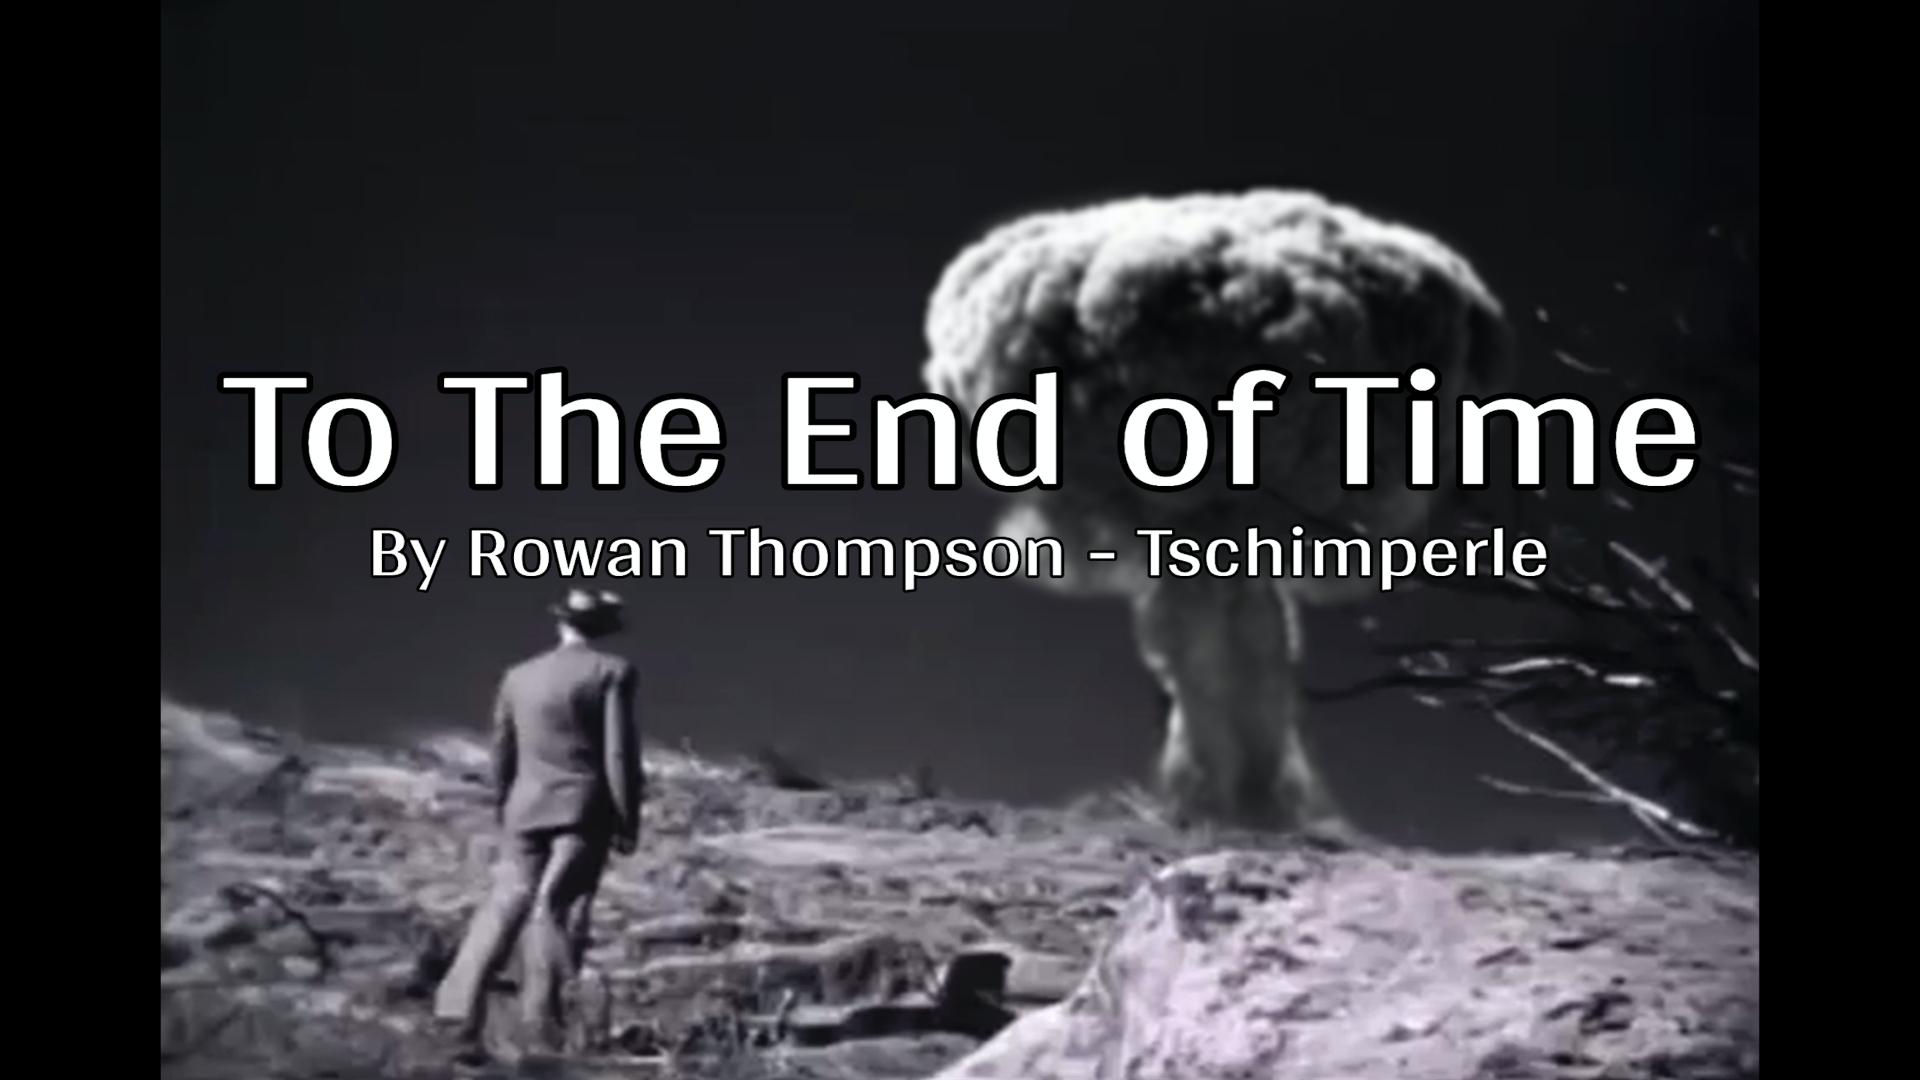 To The End of Time